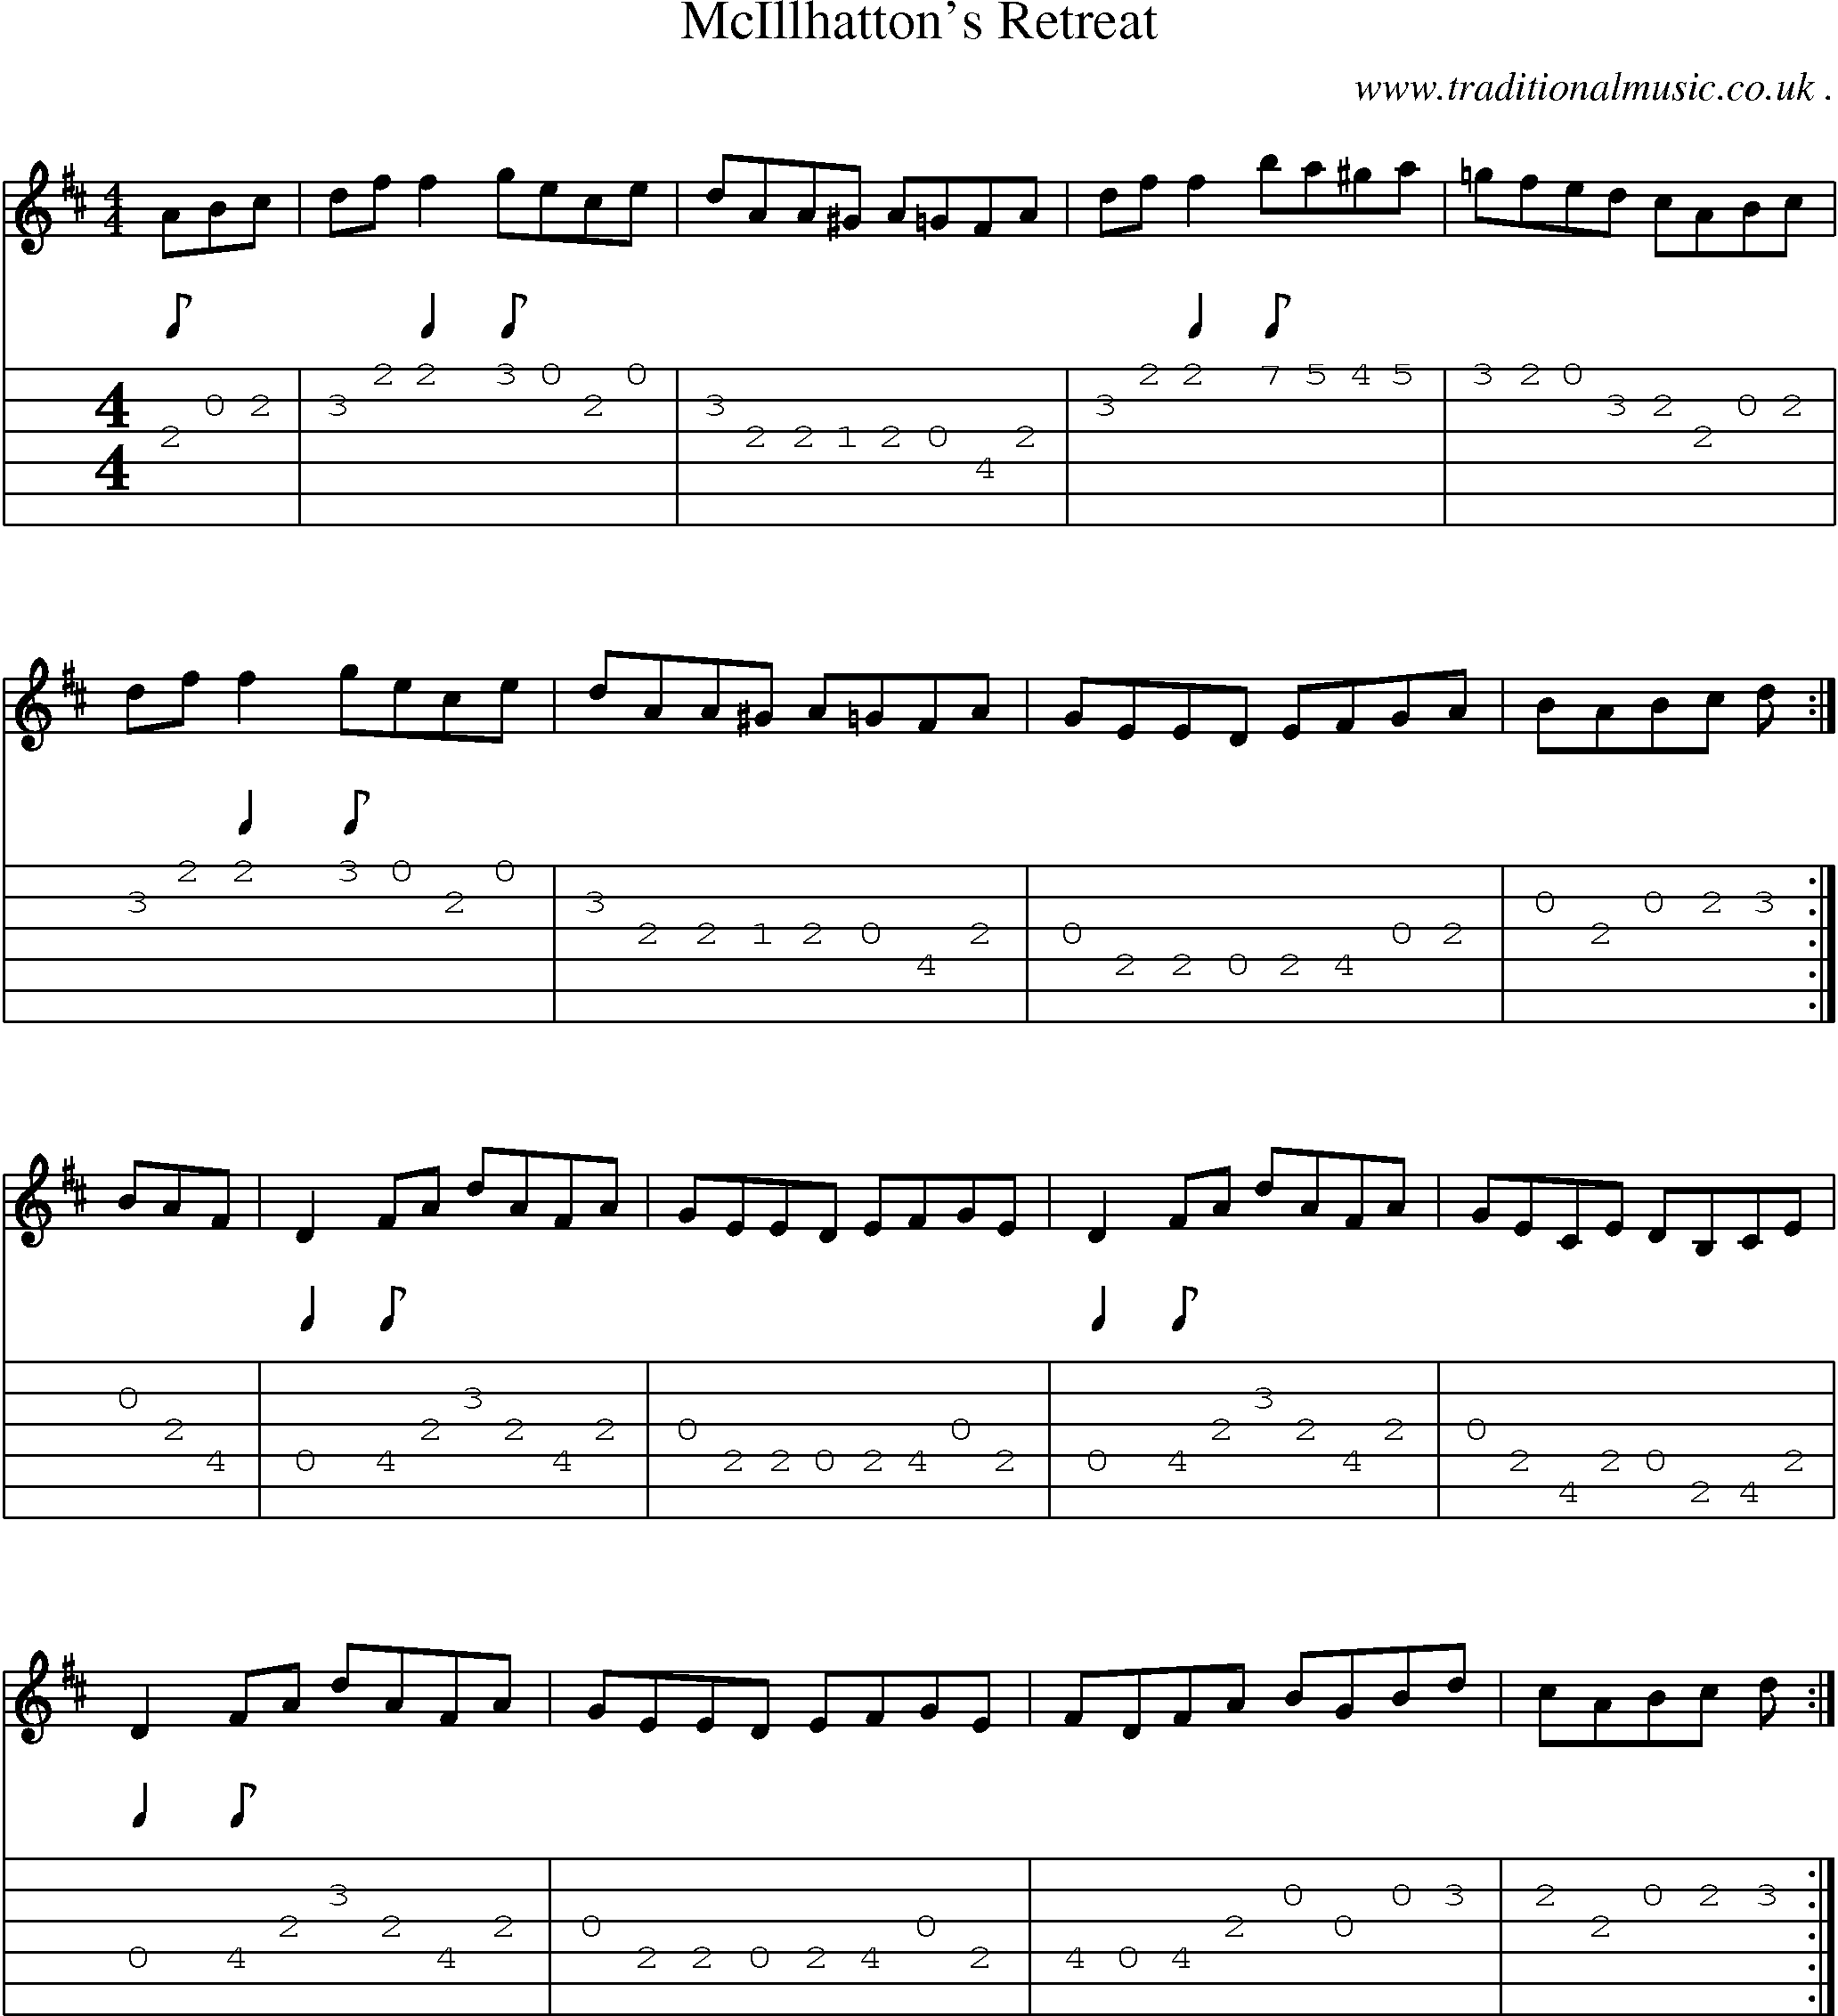 Sheet-Music and Guitar Tabs for Mcillhattons Retreat